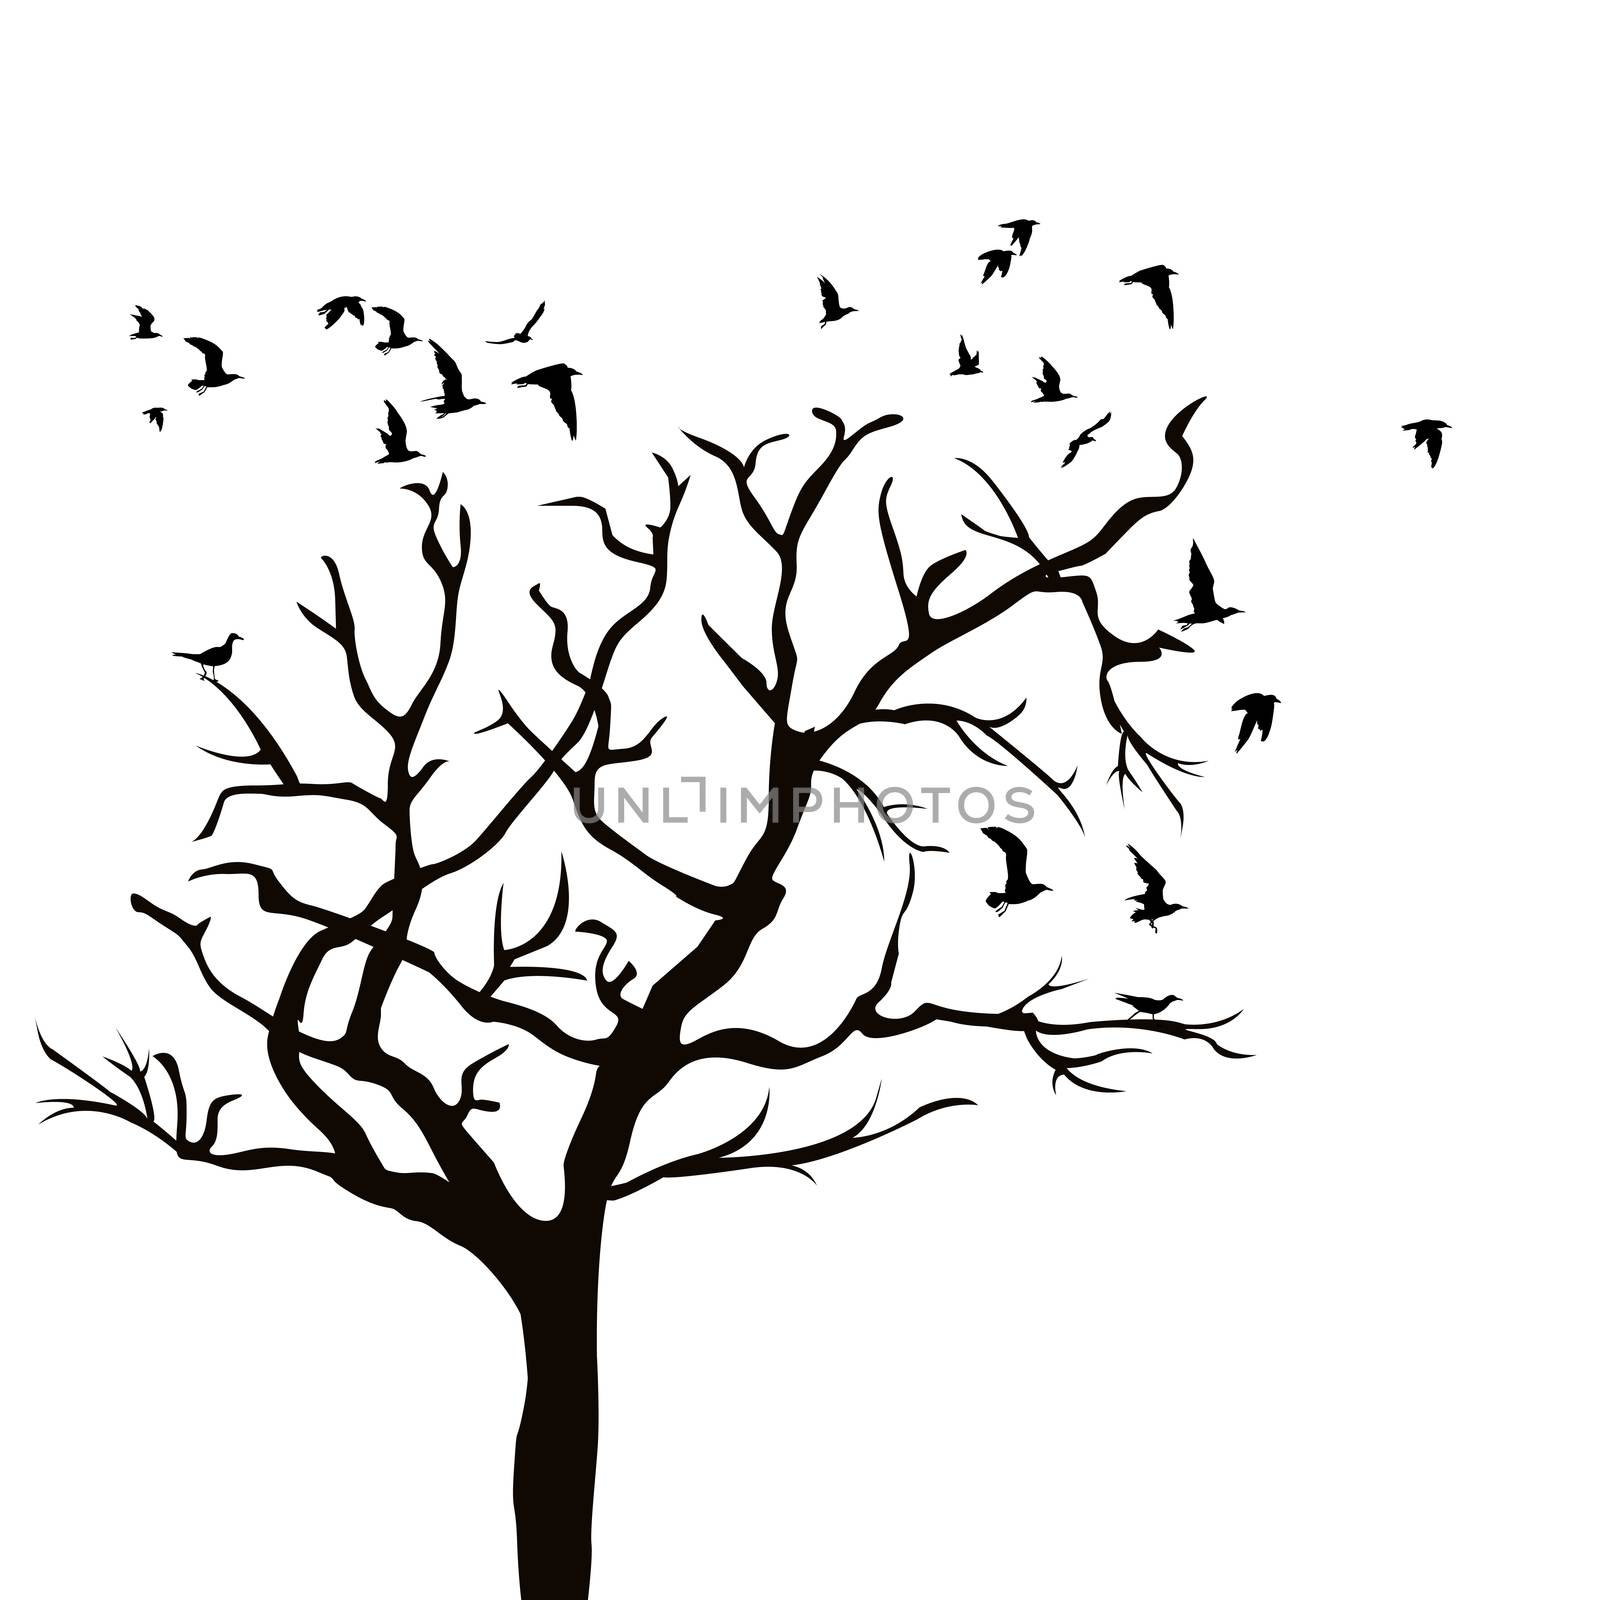 Silhouette of a tree without leaves and birds flying by hibrida13